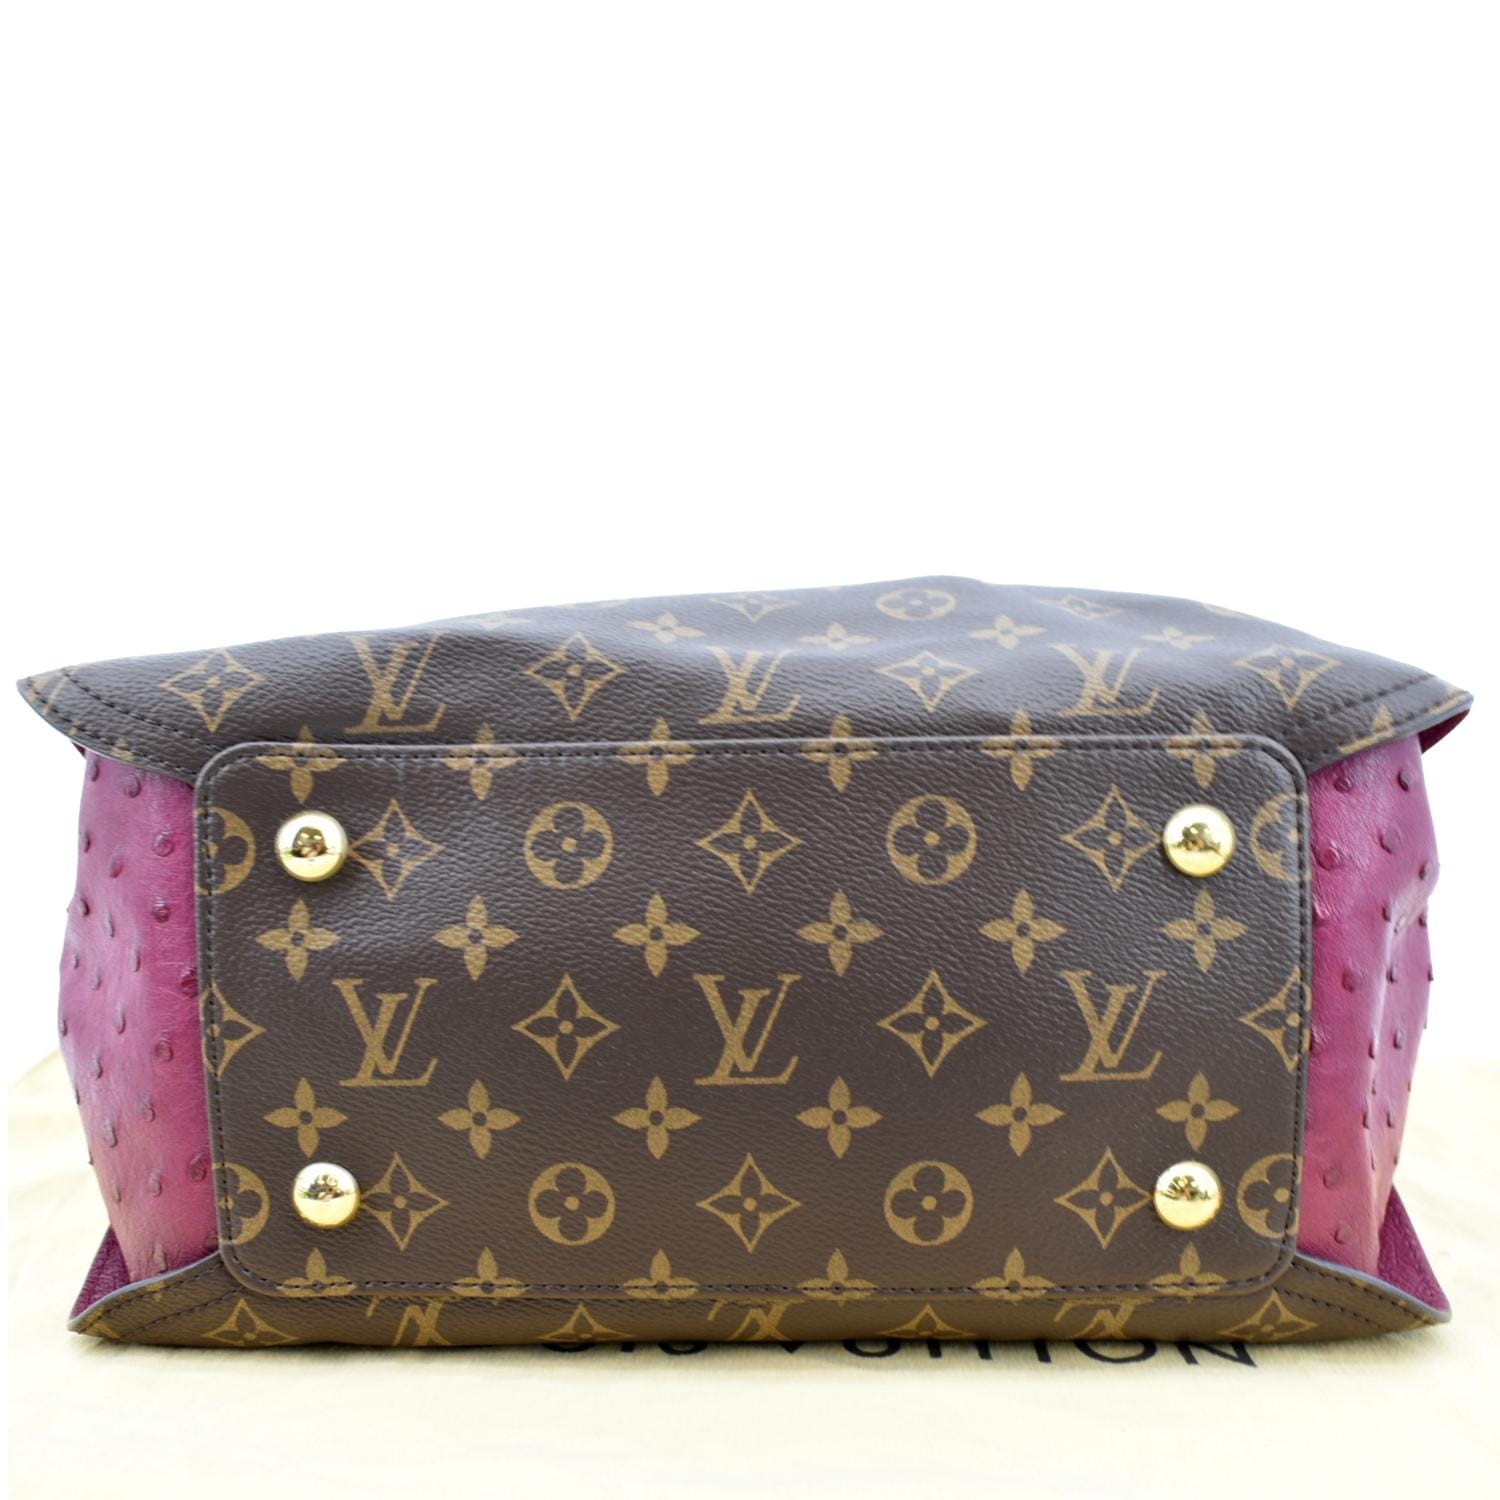 LV Theda gm with ostrich  Louis vuitton bag, Bags, Clothes design